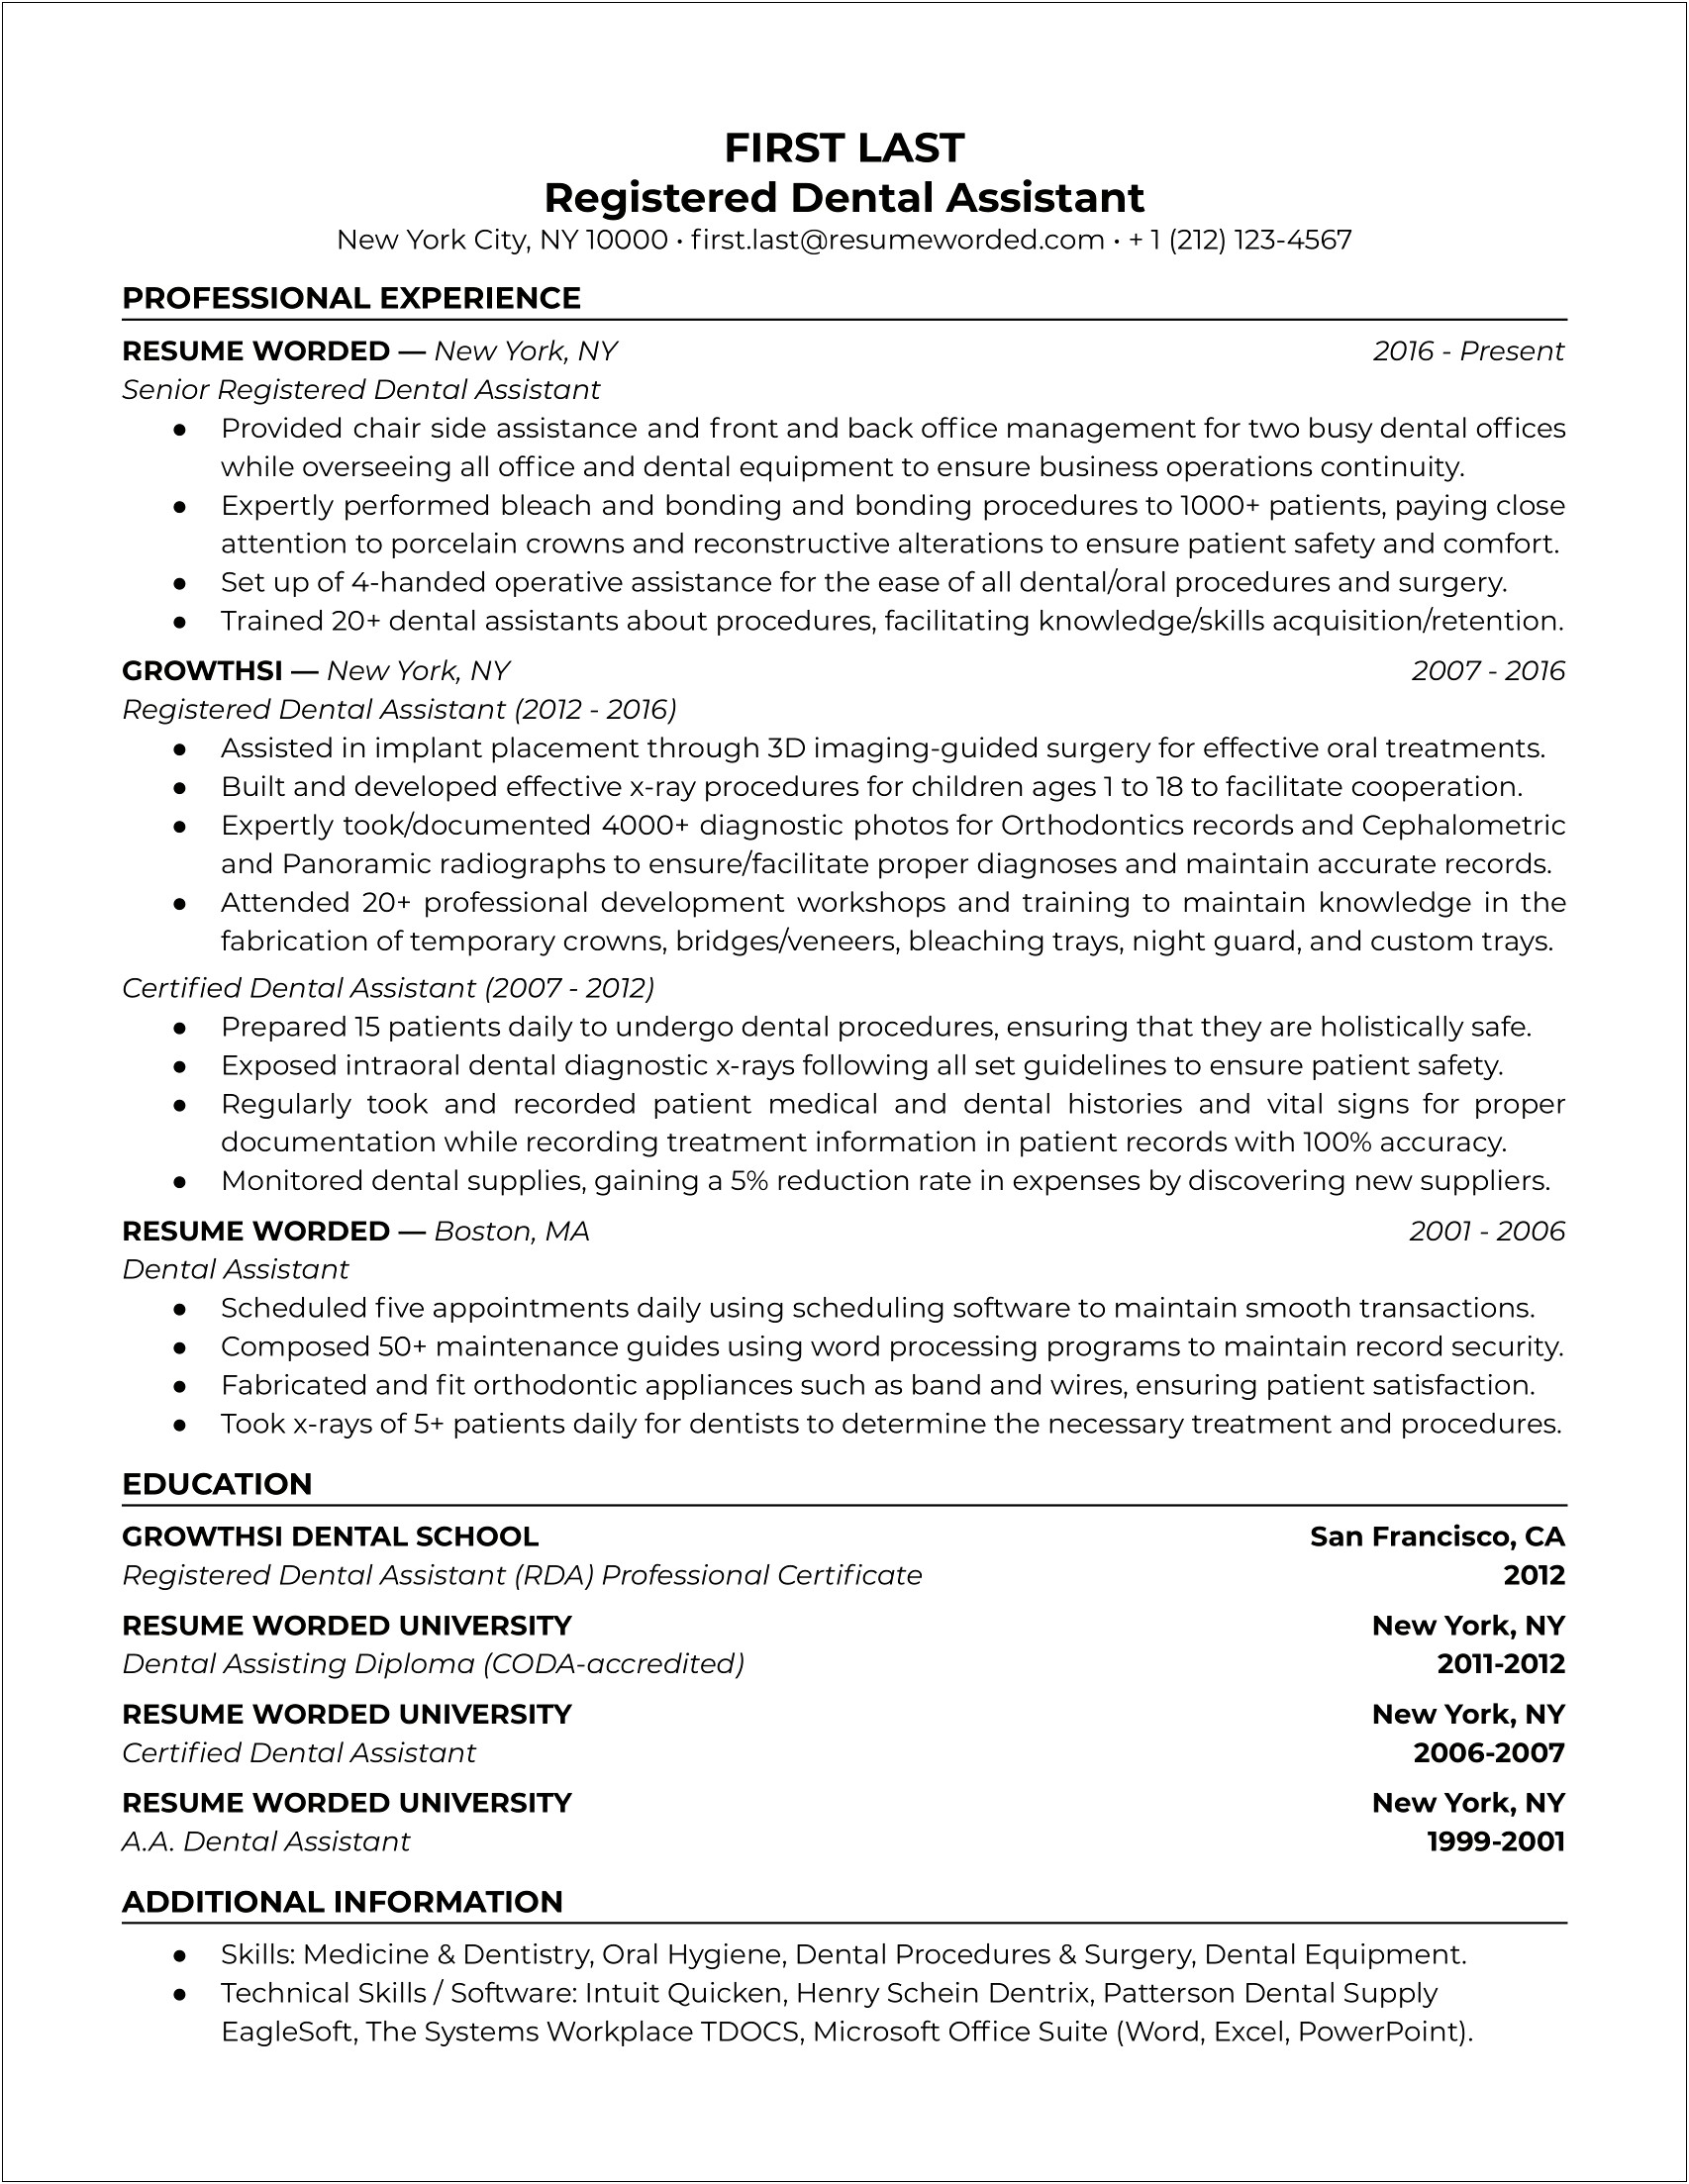 Dental Assistant Resume With No Work Experience